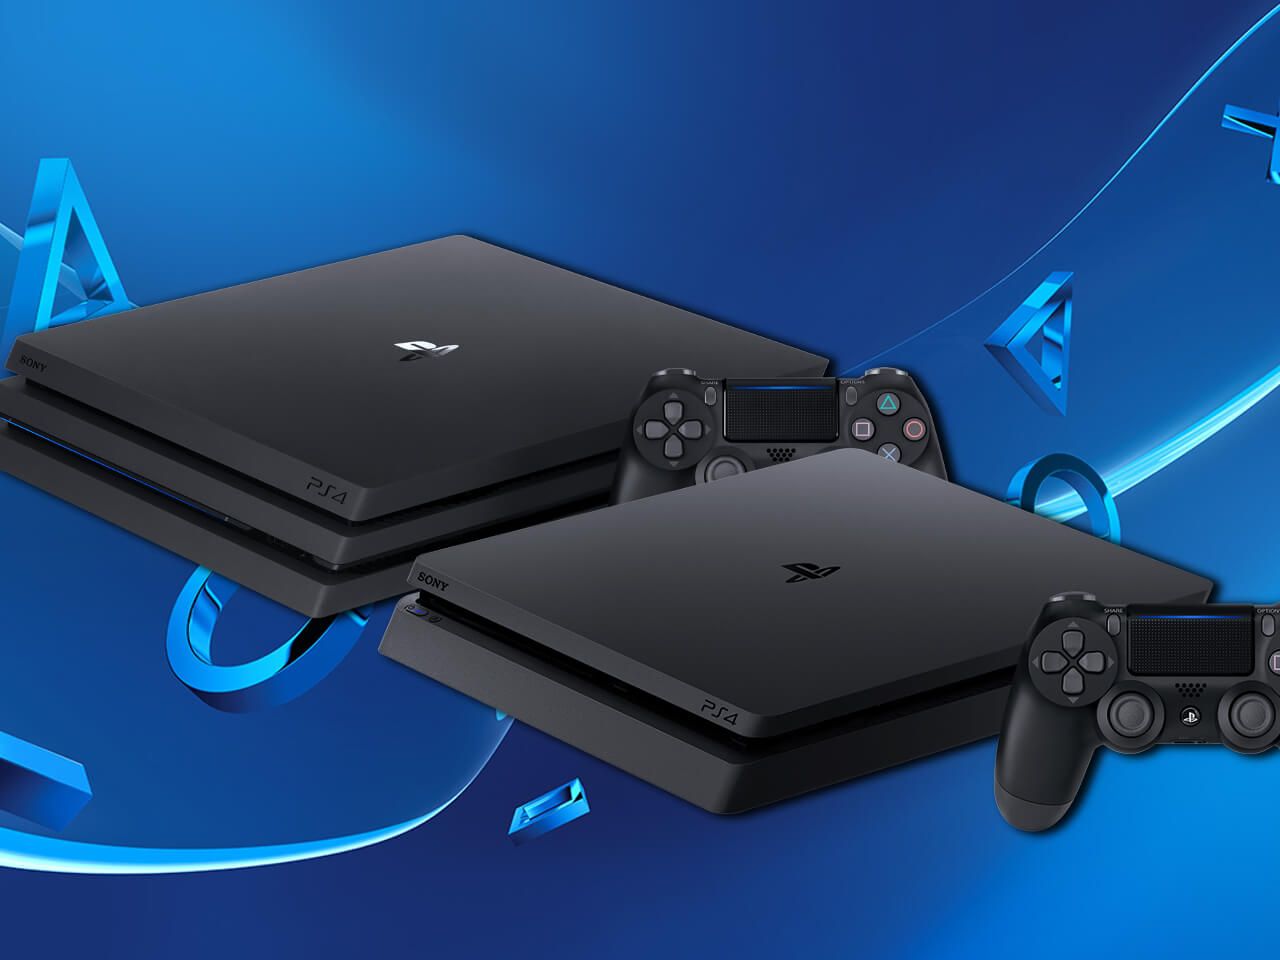 ps4 slim better than ps4